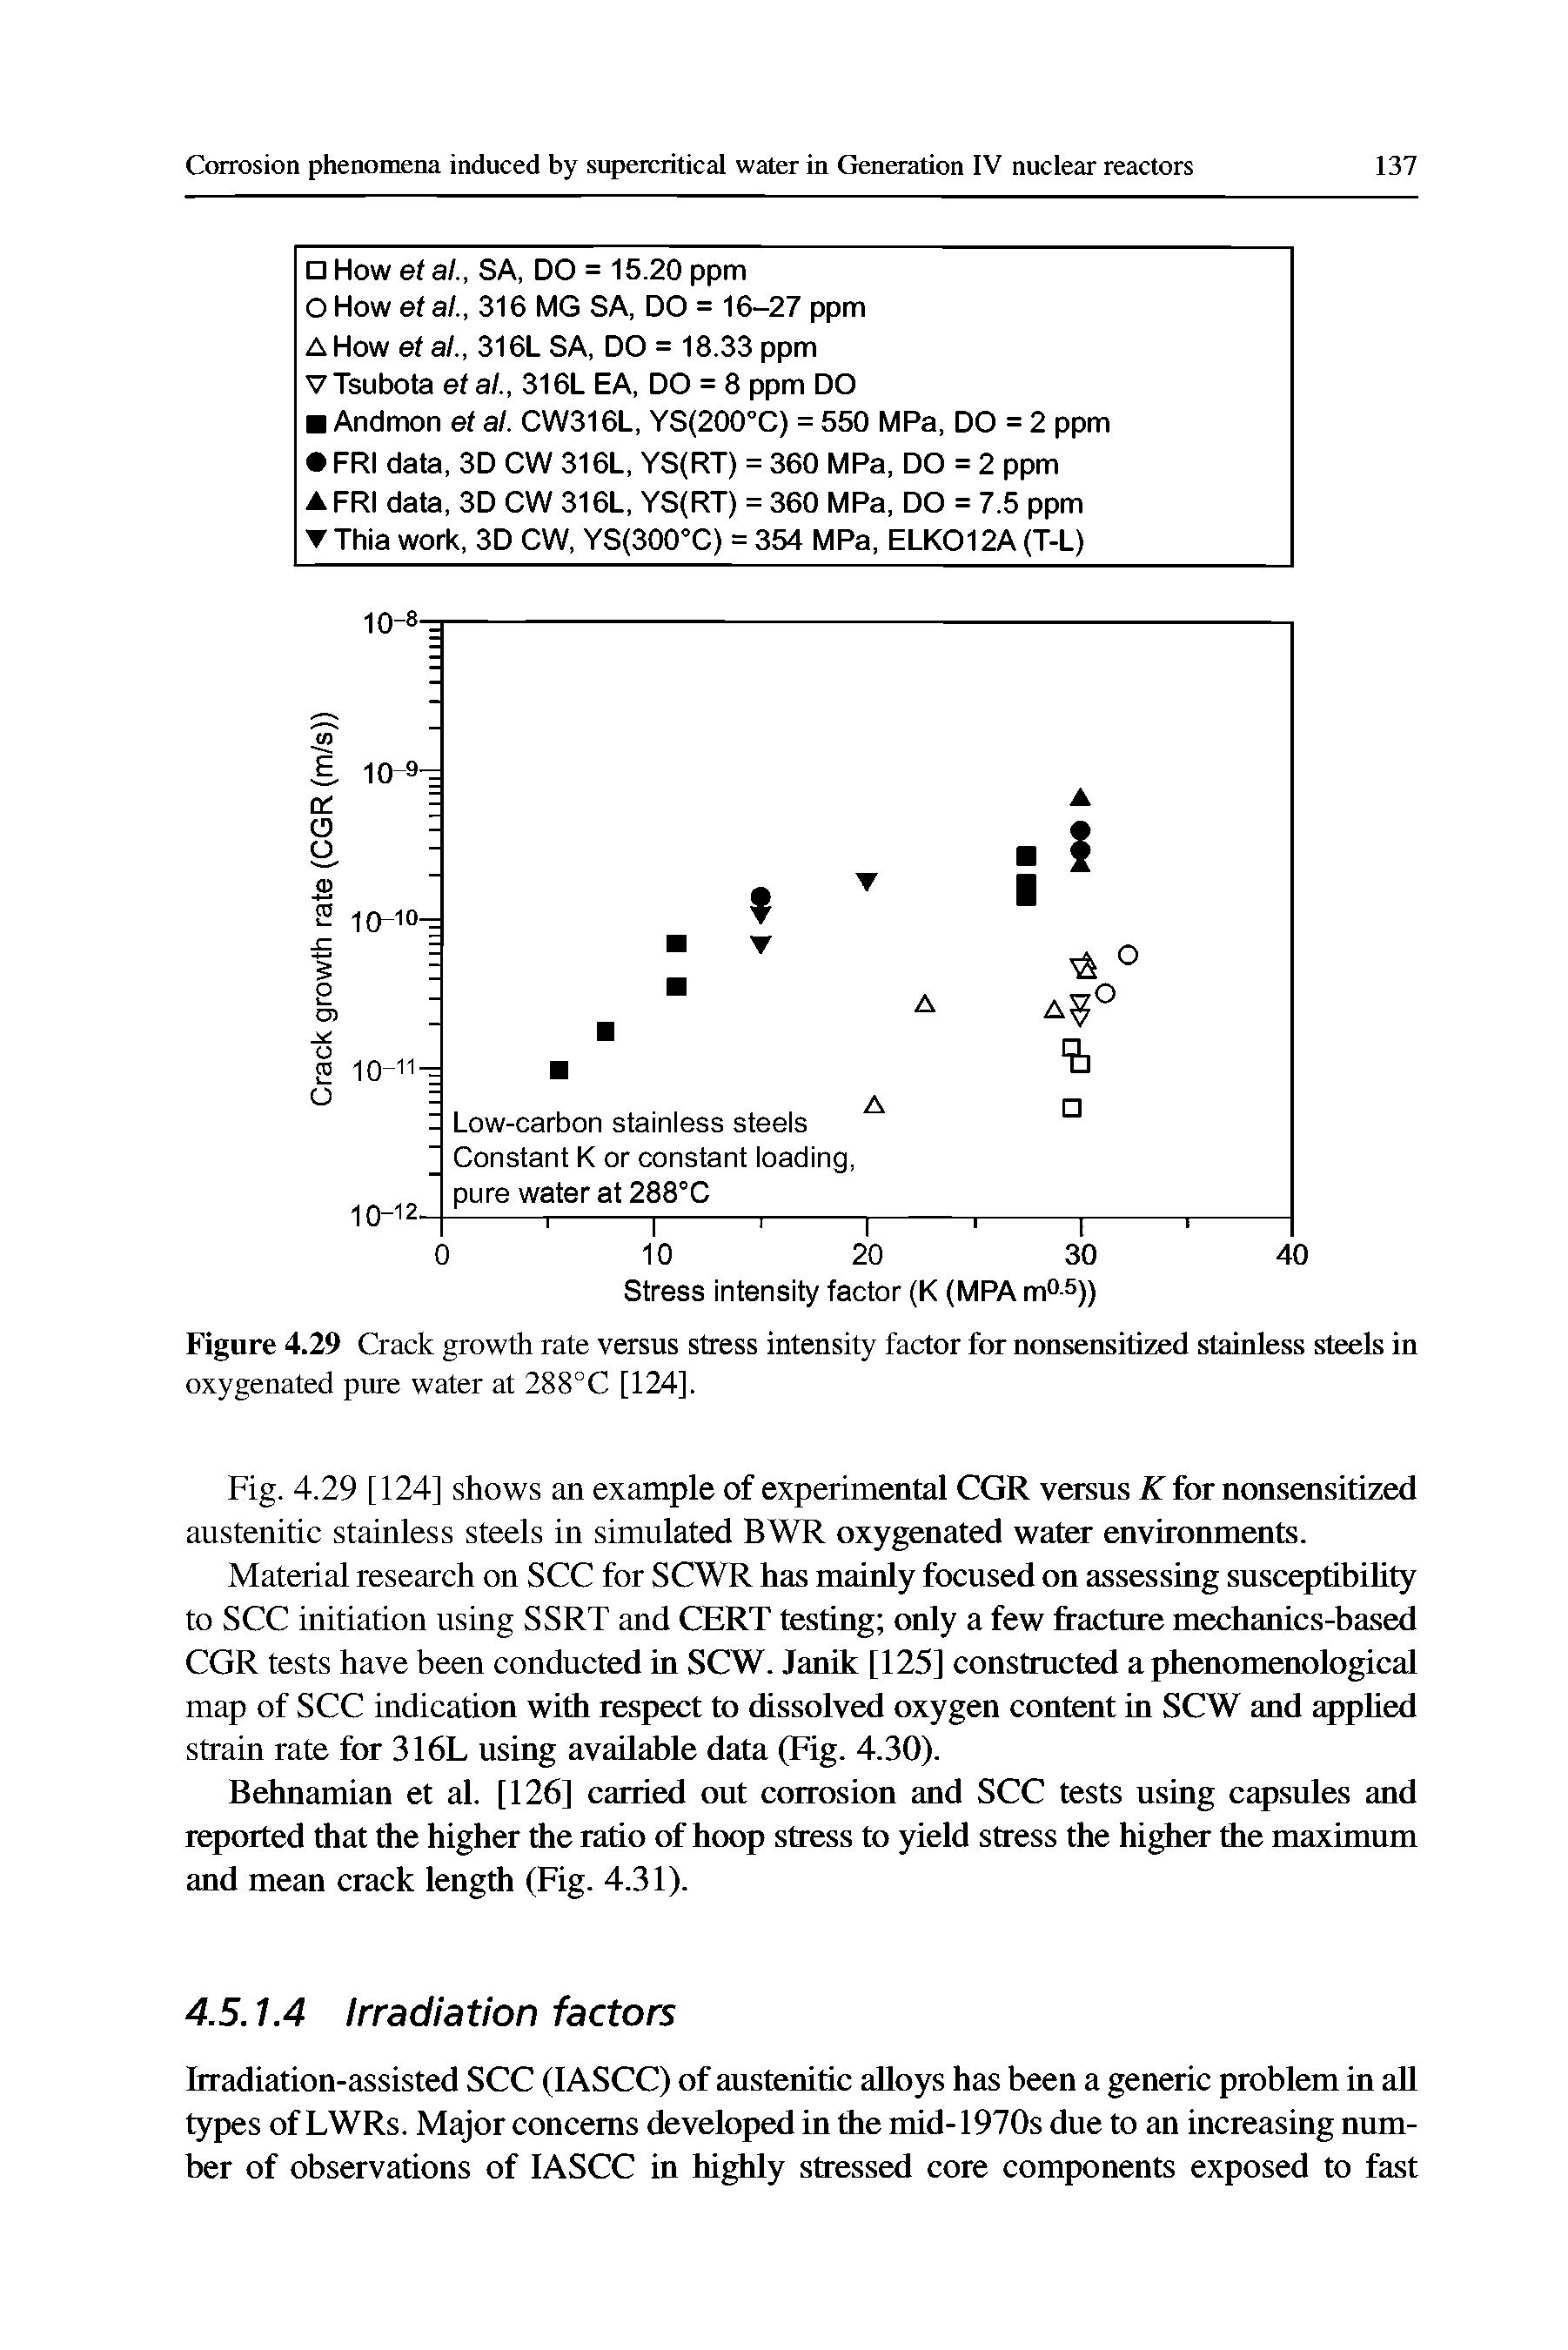 Figure 4.29 Crack growth rate versus stress intensity factor for nonsensitized stainless steels in oxygenated pure water at 288°C [124].